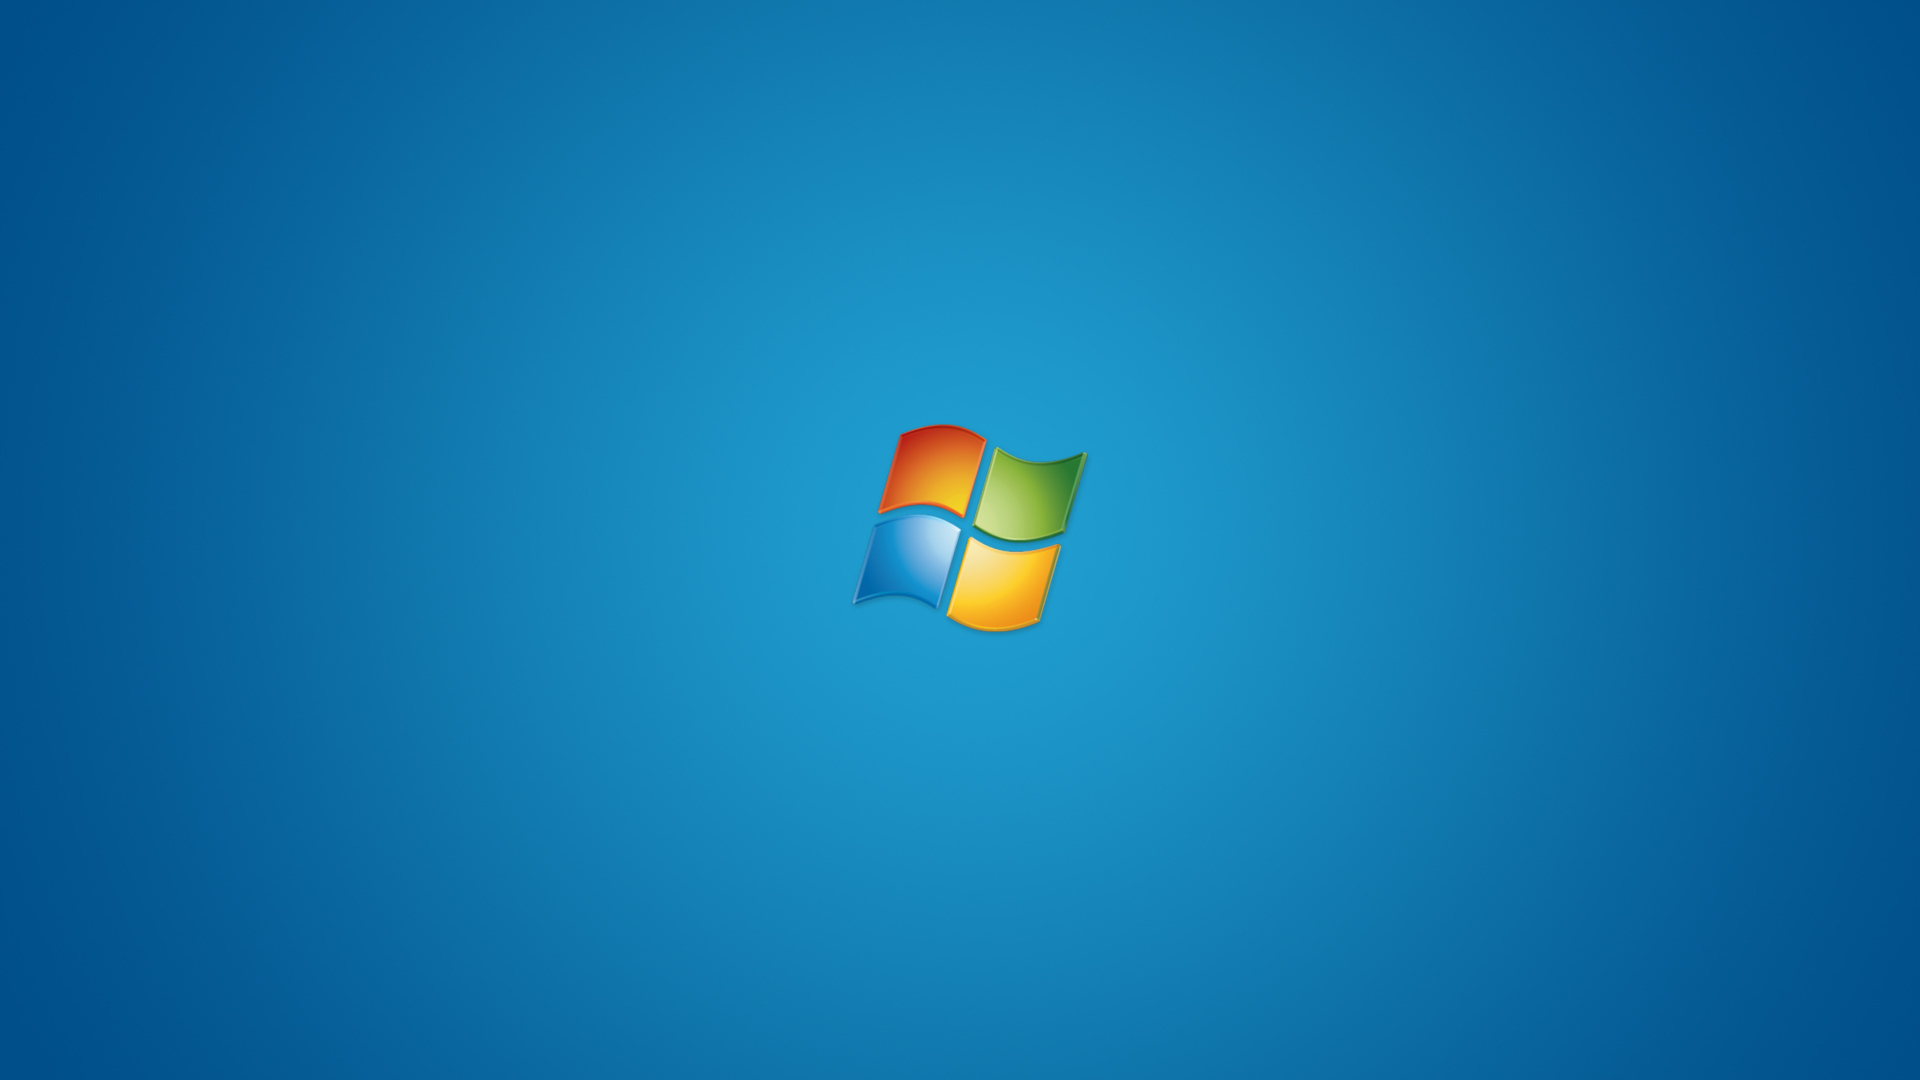 Microsoft Computer Backgrounds